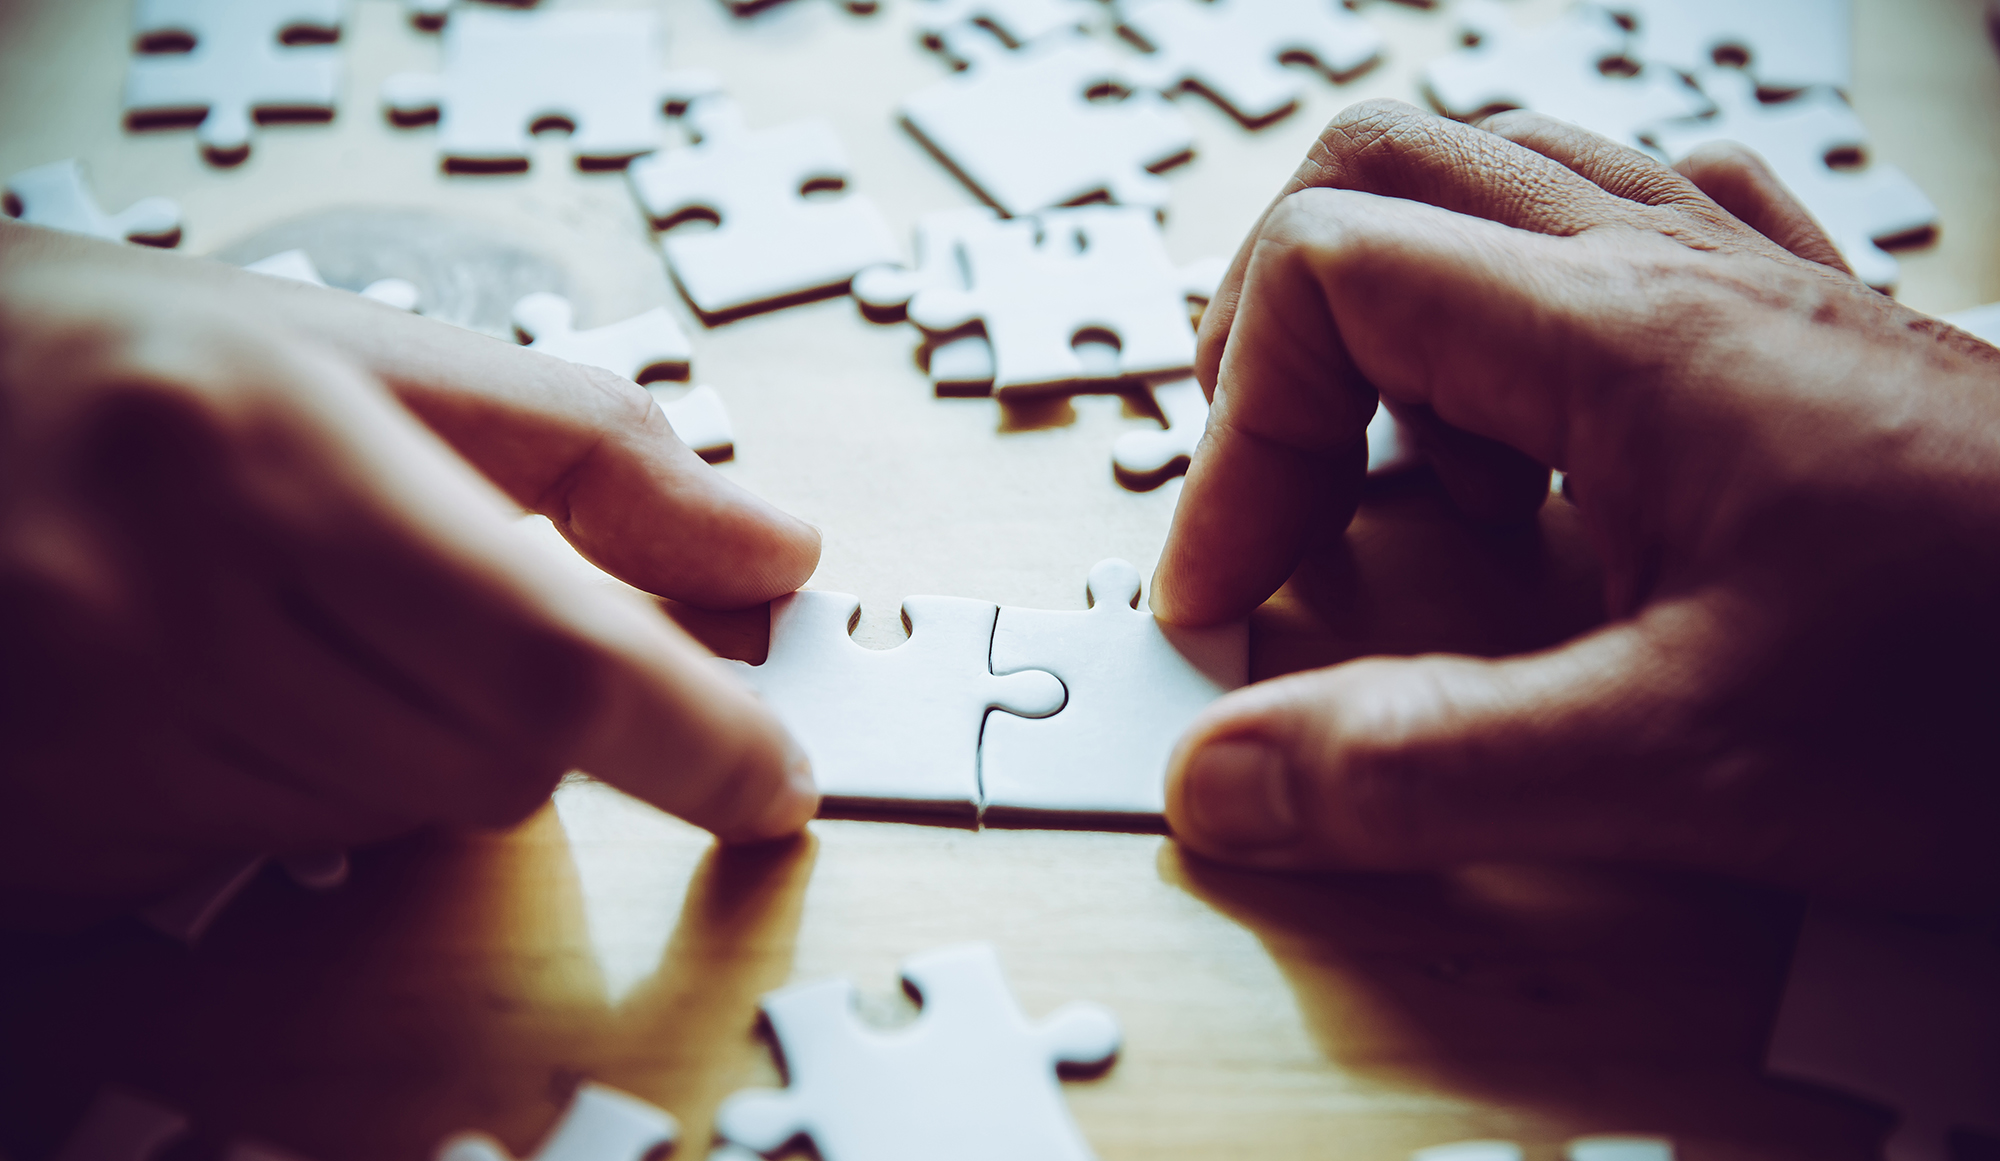 Hands playing jigsaw puzzle piece game together on wooden table